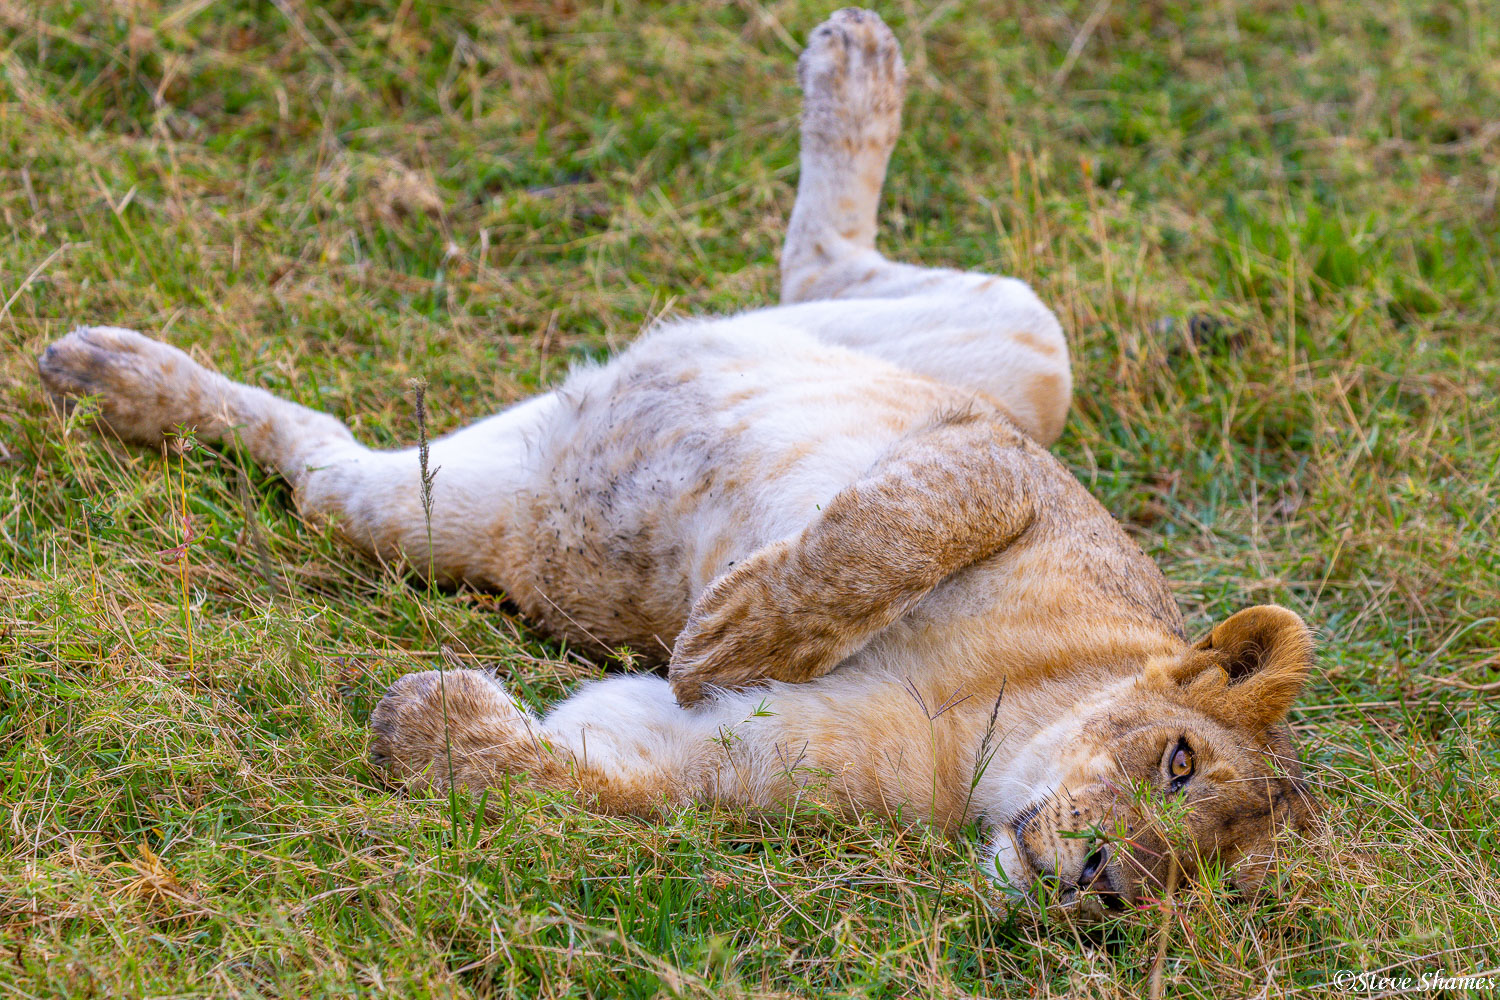 Lioness rolling around in the grass. Reminds me our housecat.